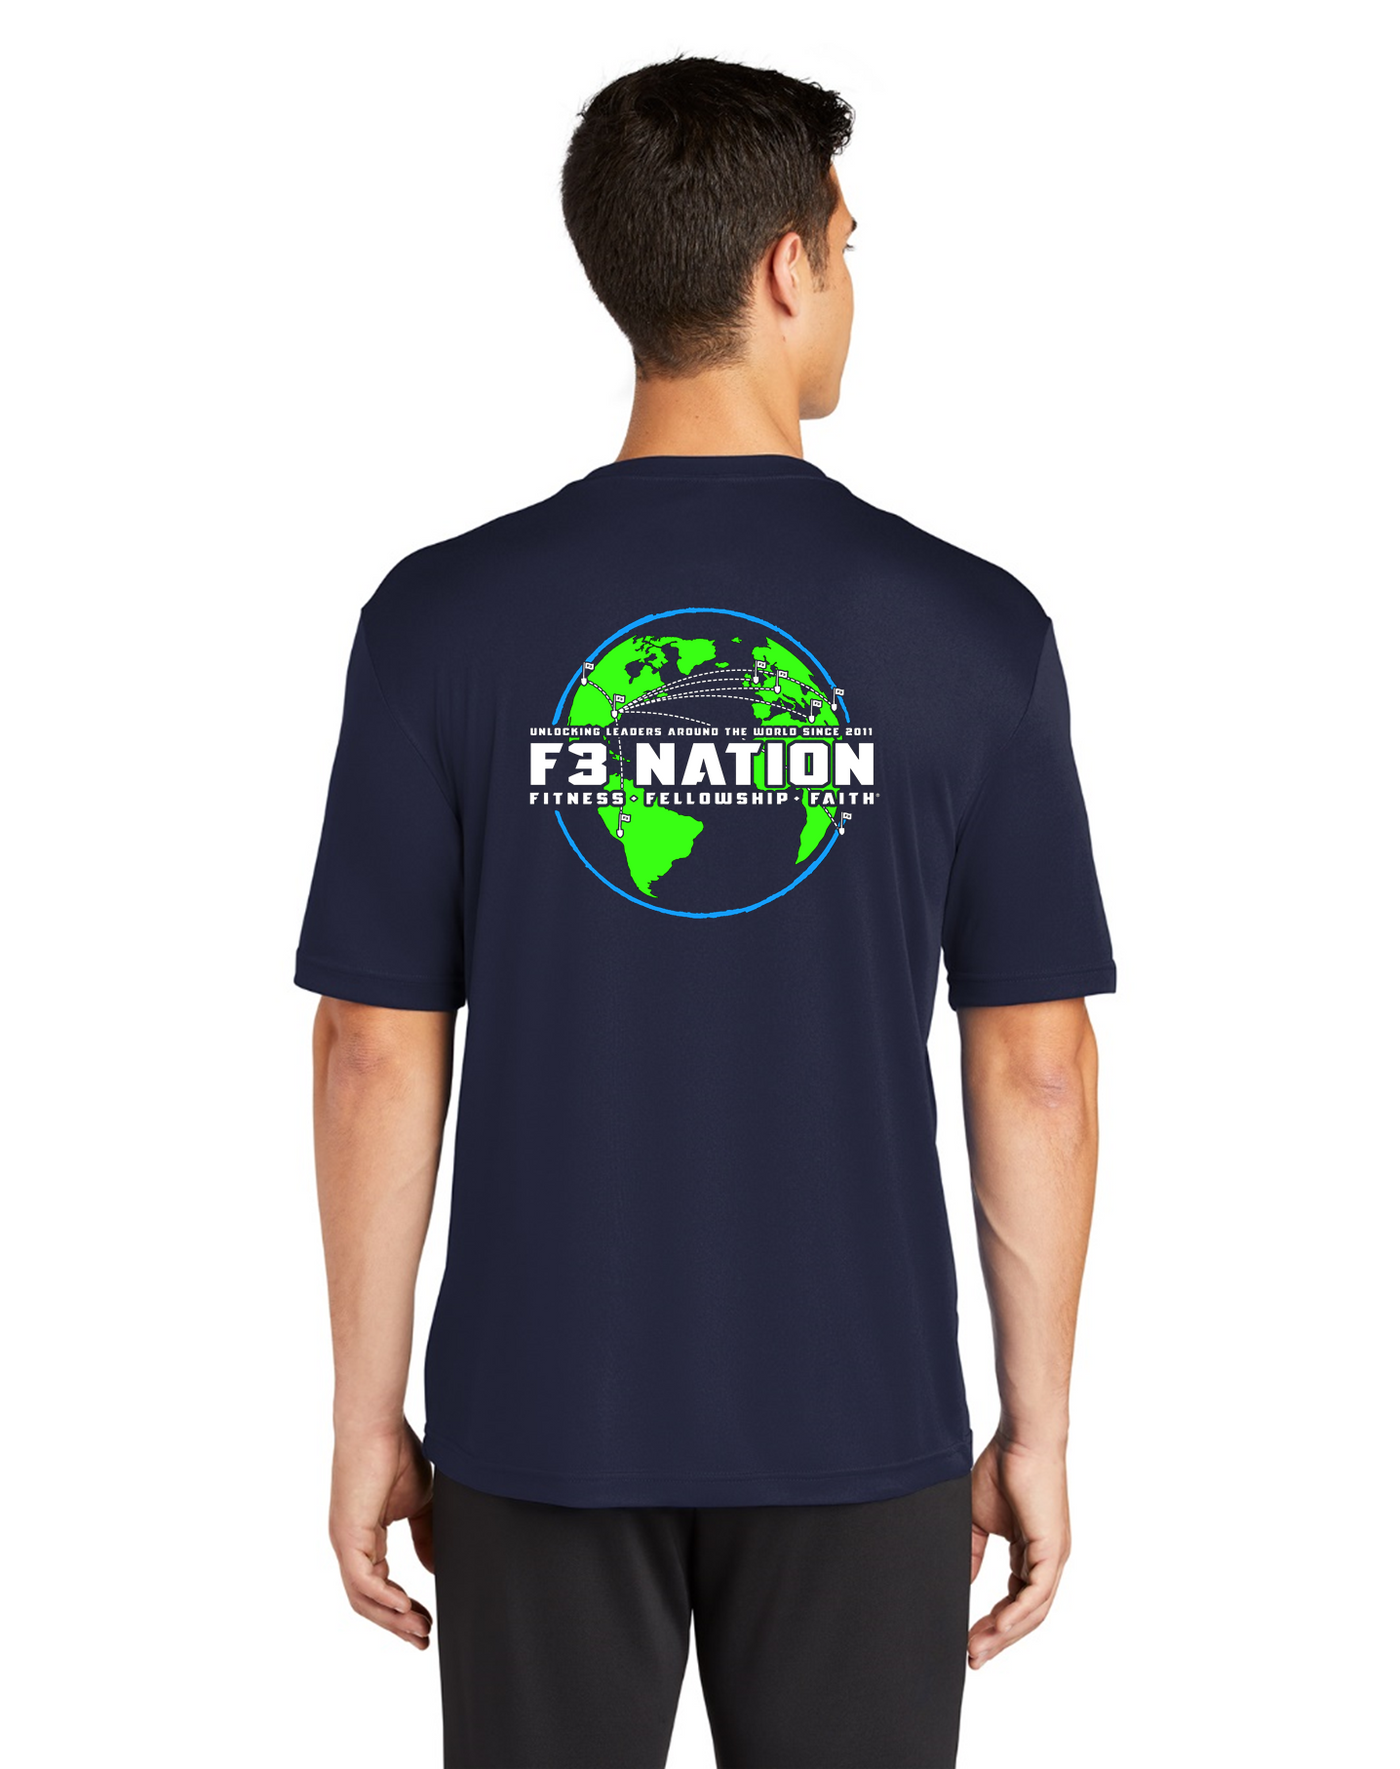 F3 2022 Official F3 Race Jersey - Sport-Tek  Tall PosiCharge Competitor Tee Shirts Pre-Order